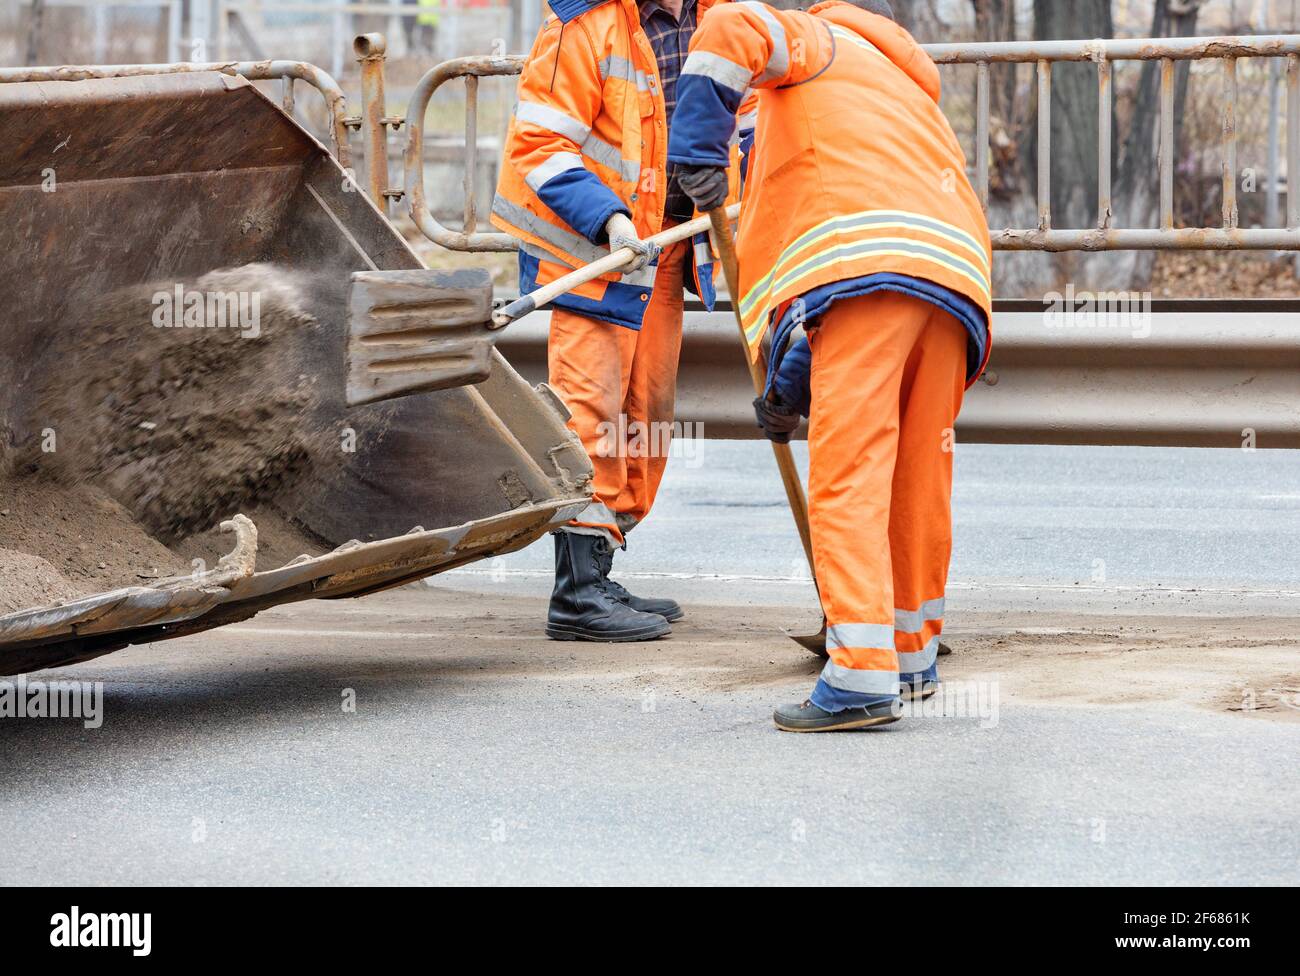 Road workers scrape off accumulated sand between lanes of the road with shovels and load it into a metal grader bucket. Stock Photo